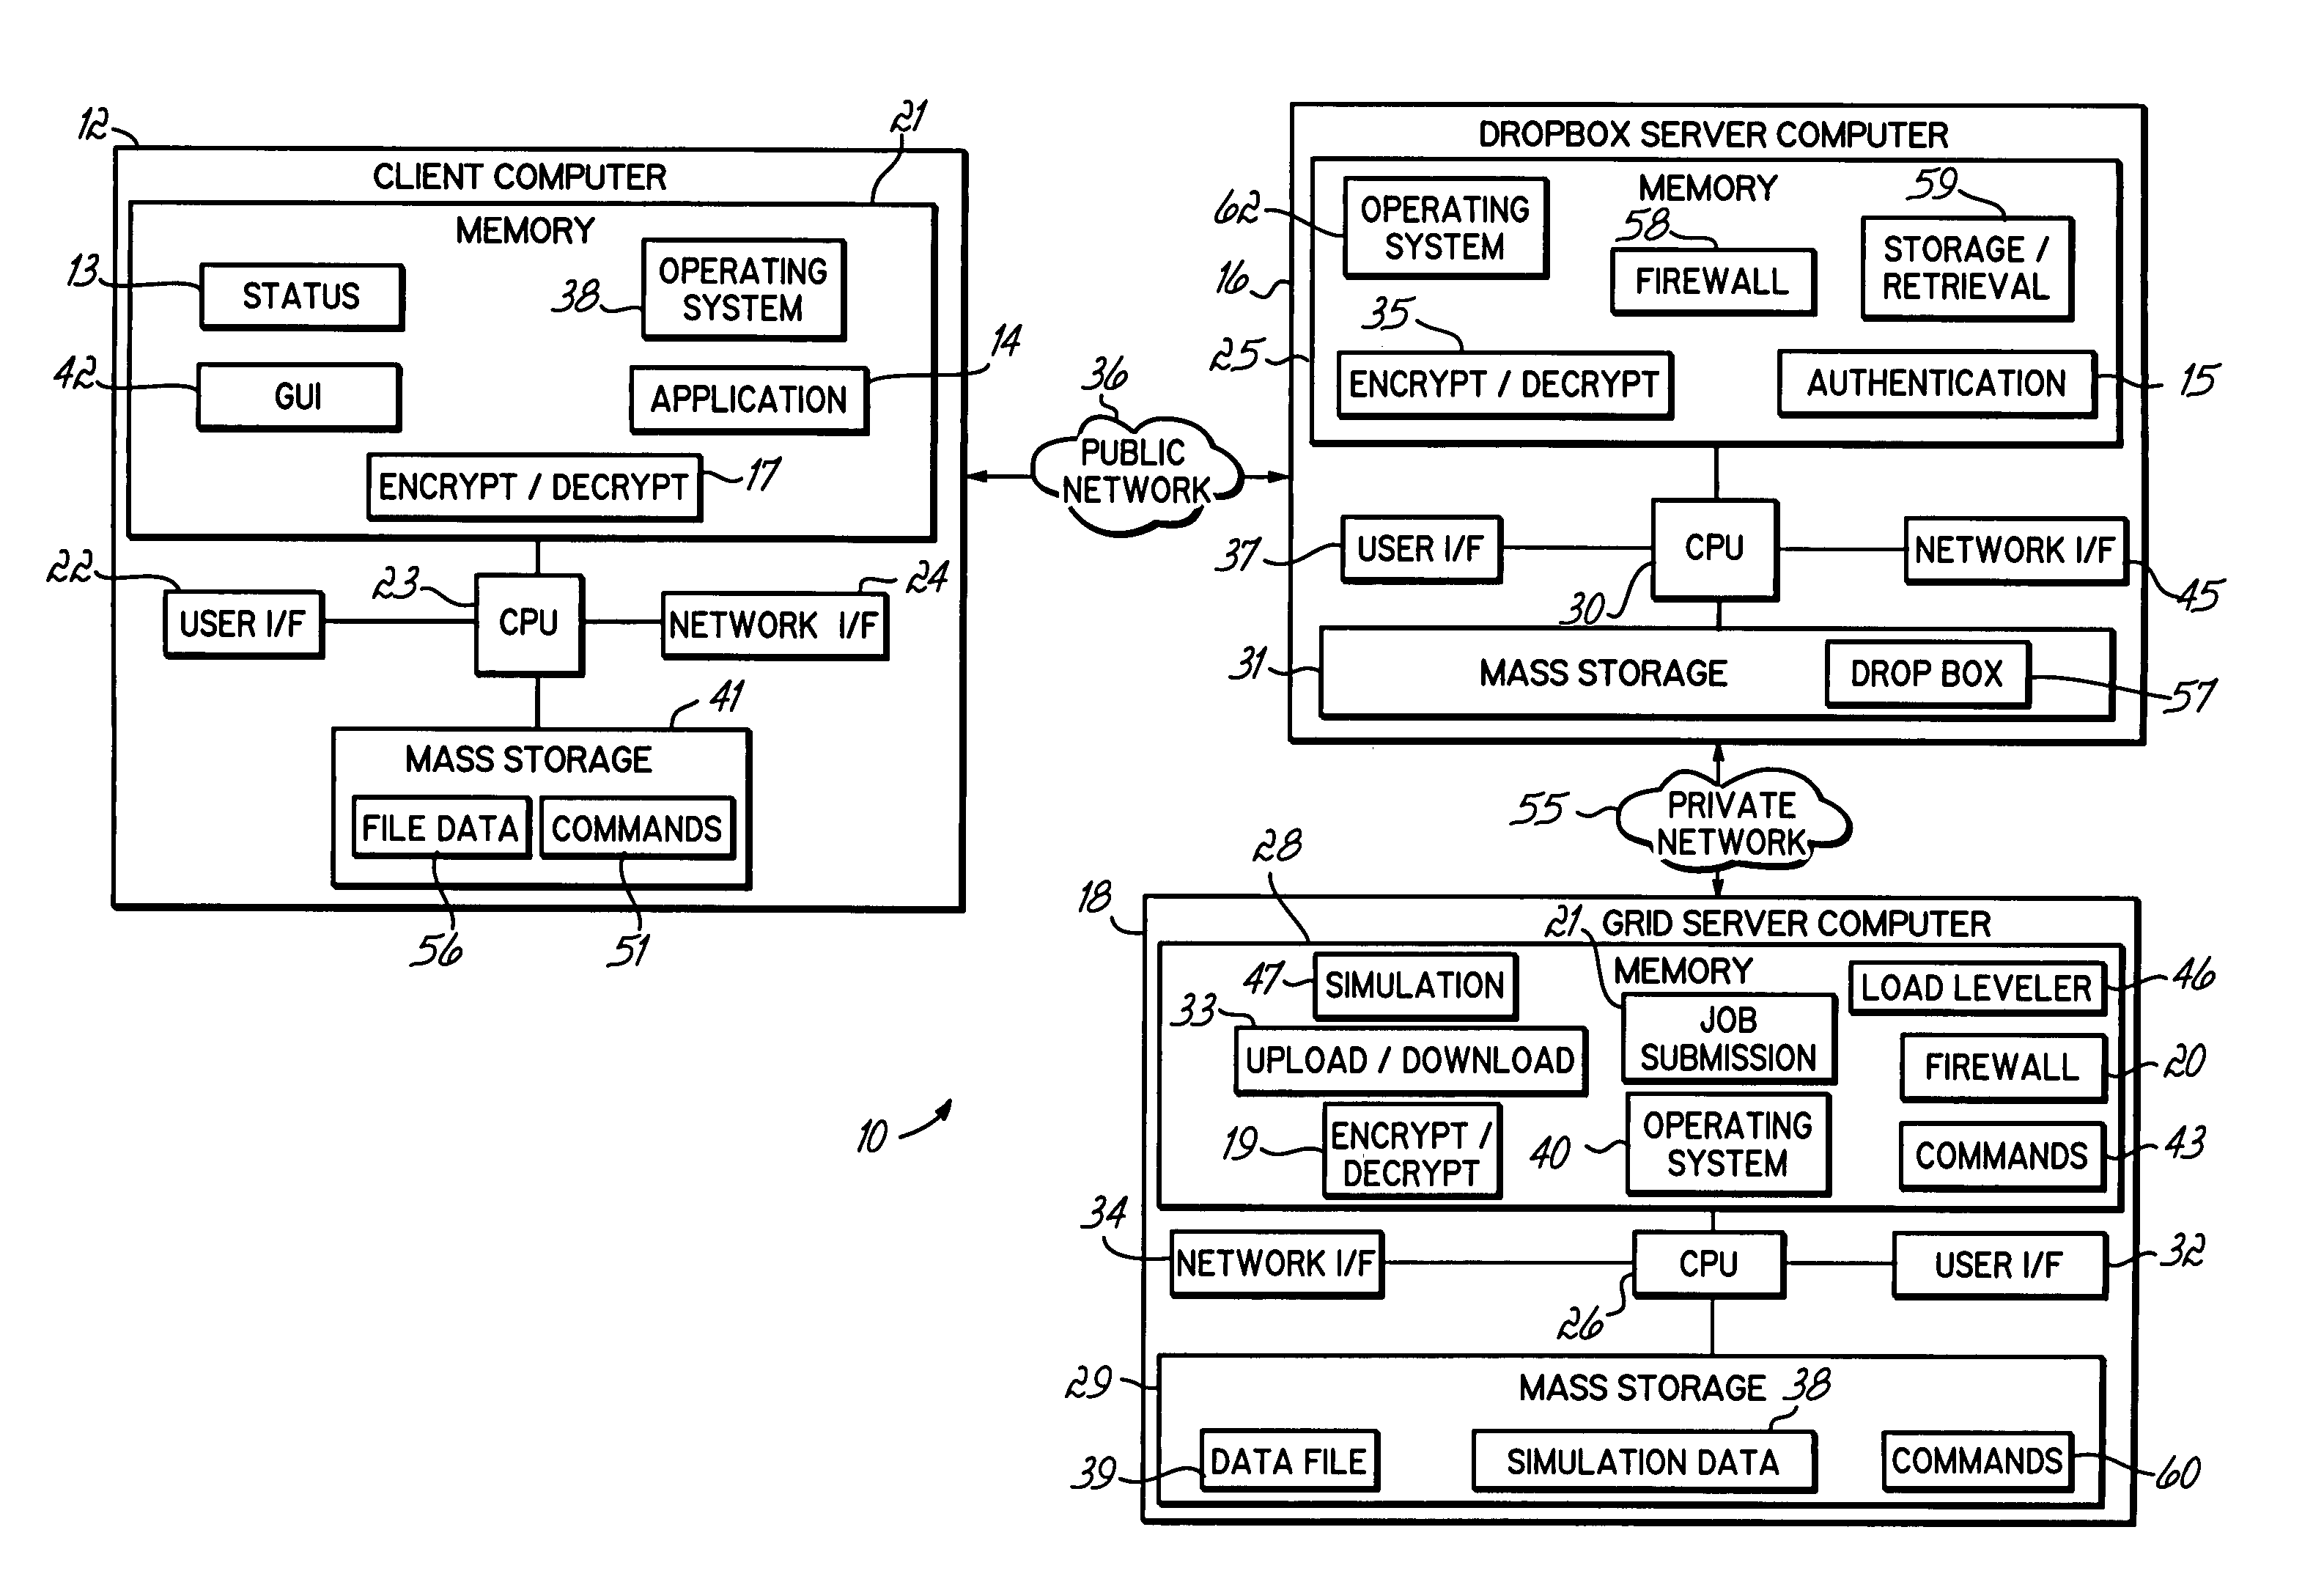 Computer grid access management system